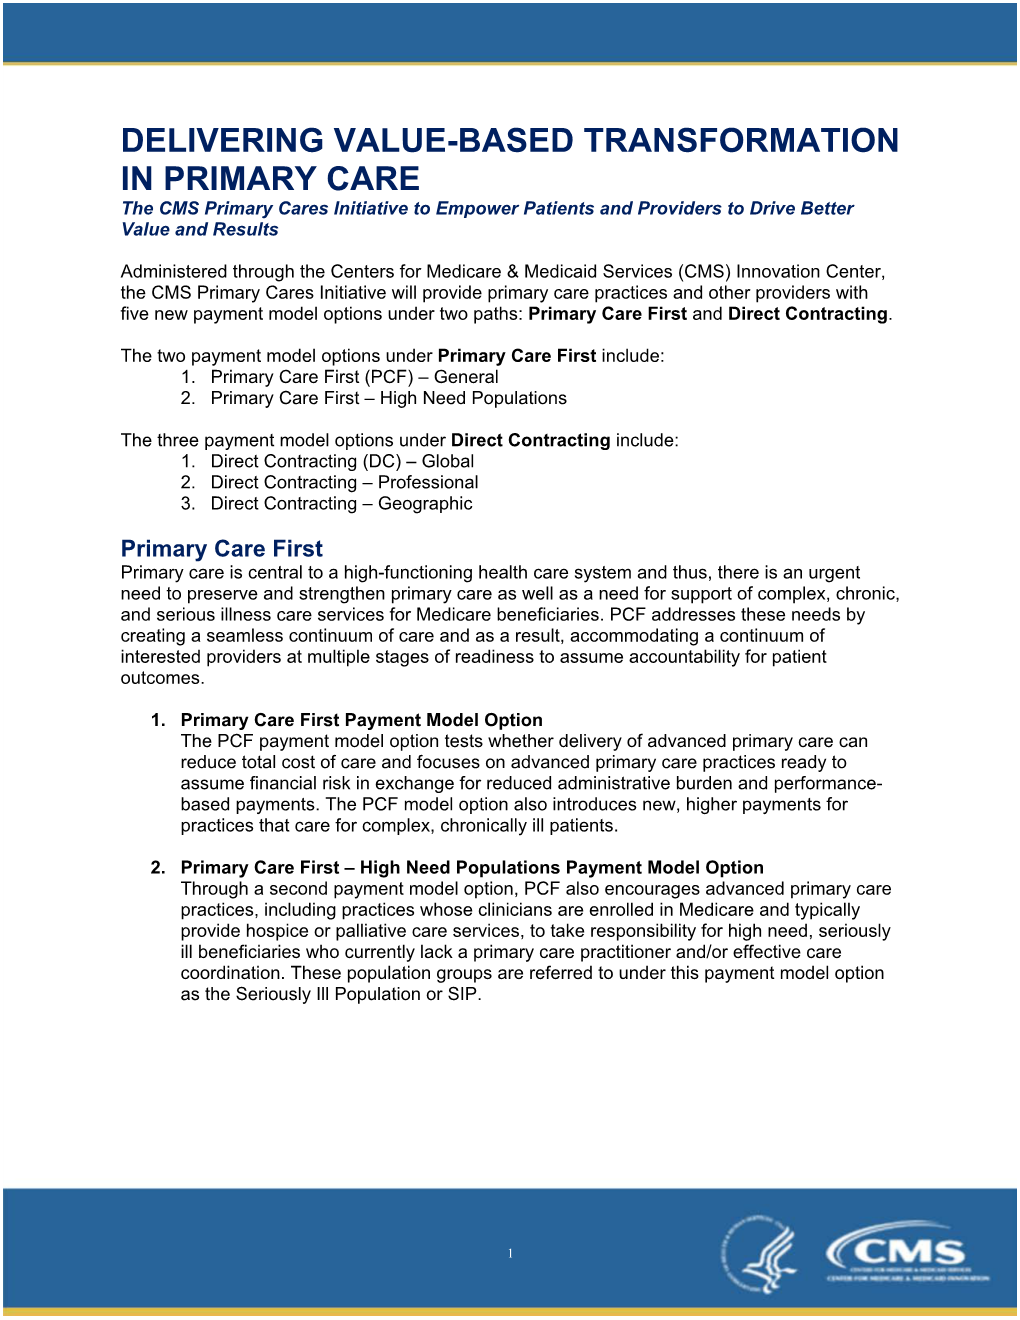 Five Payment Model Options, Primary Care First and Direct Contracting